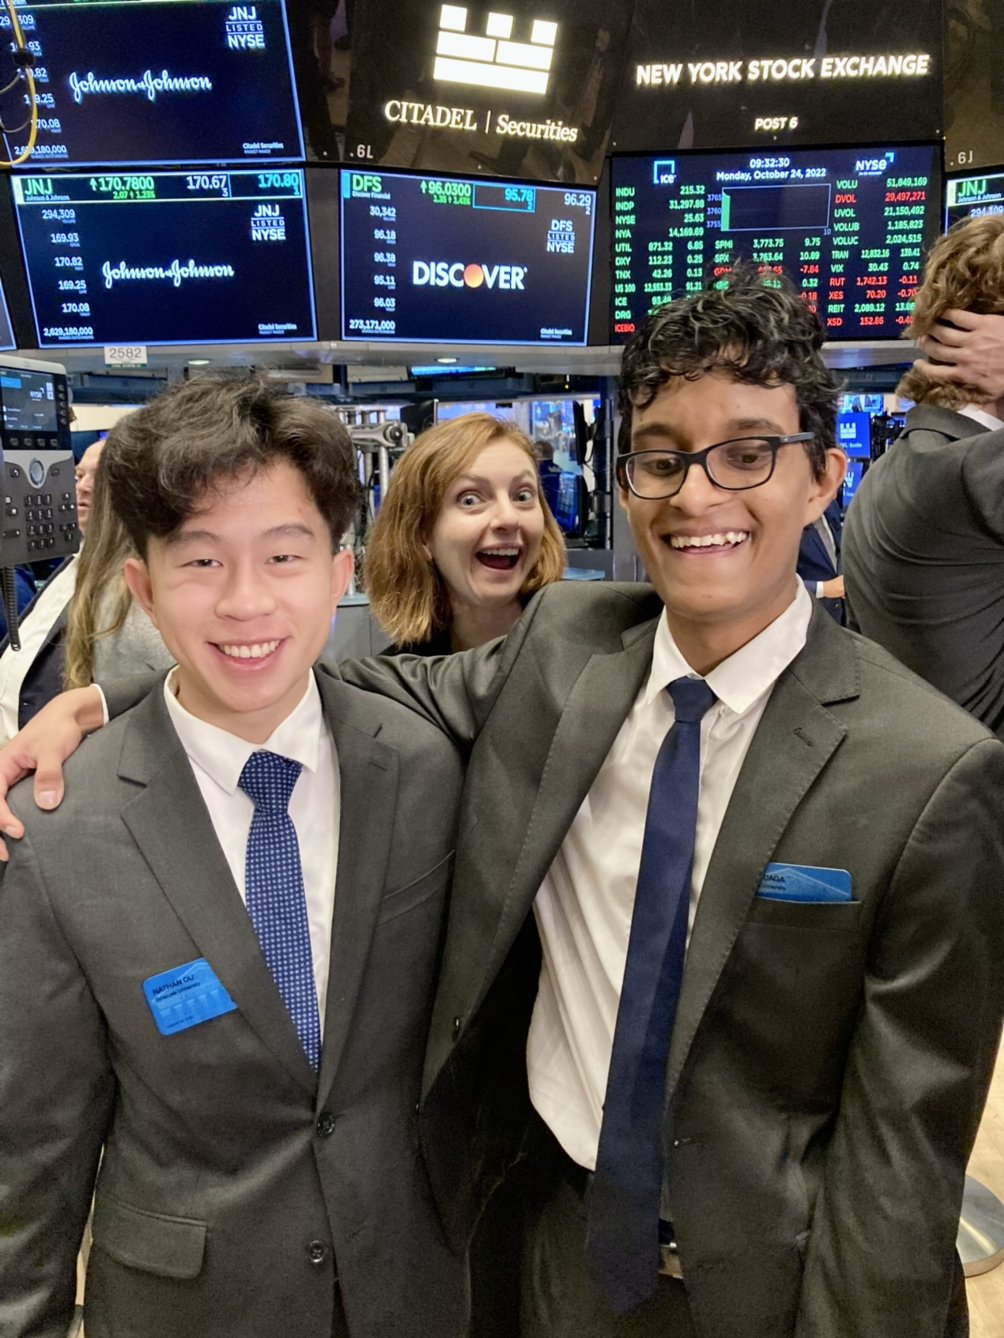 Students Nathan Ou (left) and Aryan Daga (right) with Academic and Career Advisor Rachael Vines (center) on the floor of the NYSE.